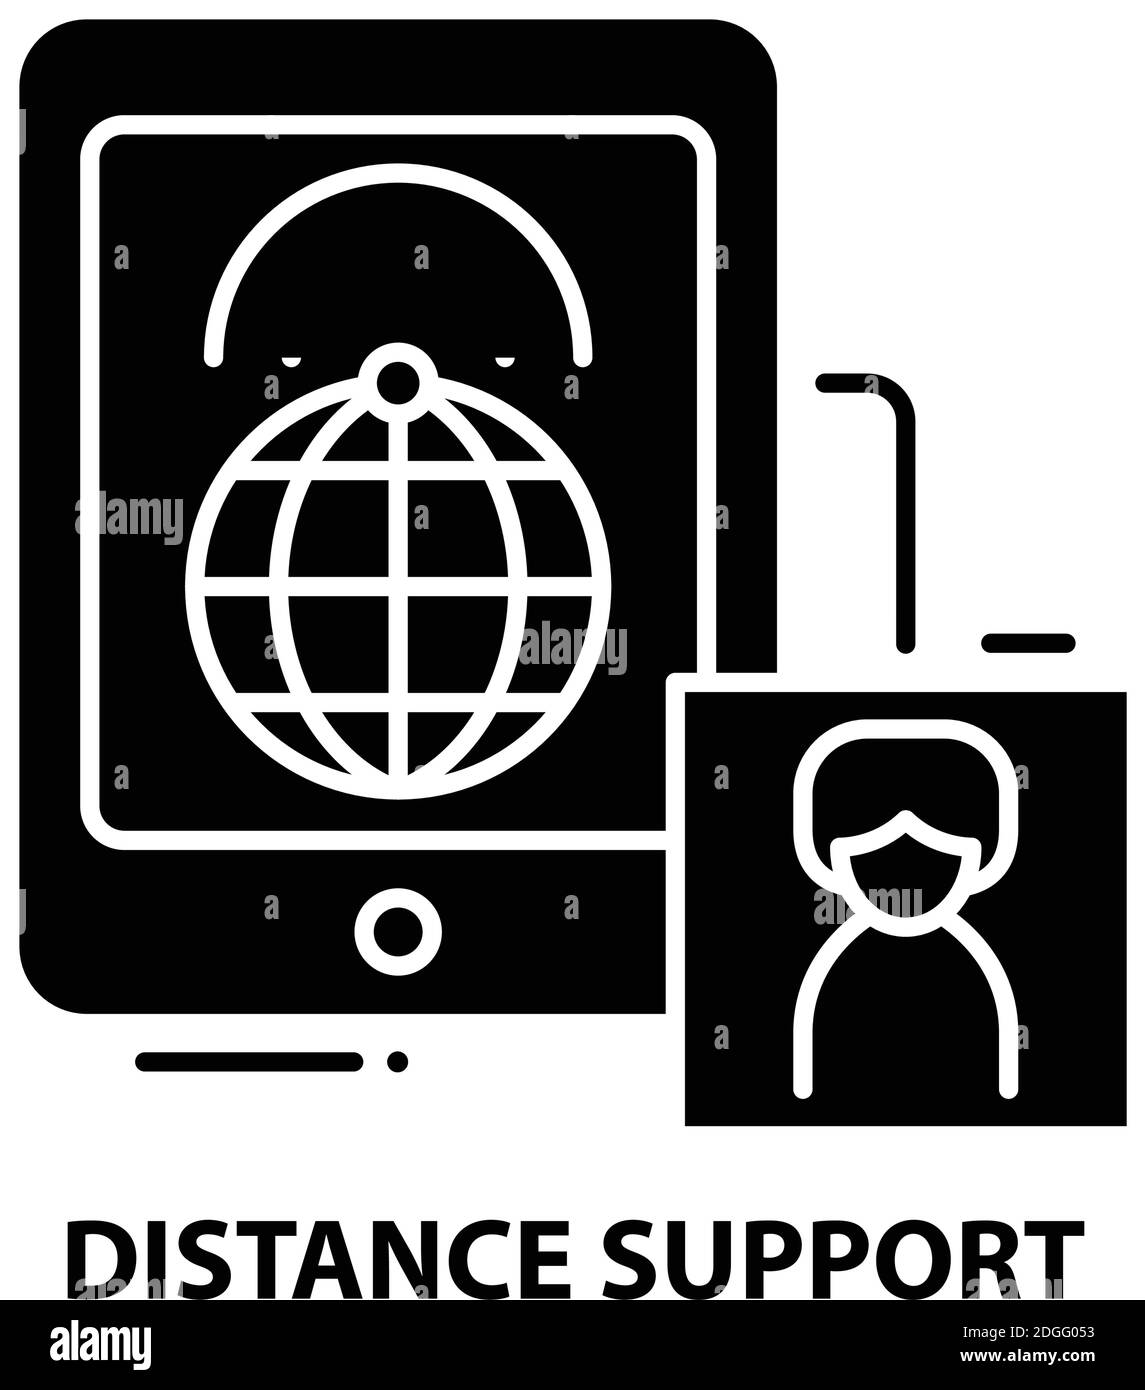 distance support icon, black vector sign with editable strokes, concept illustration Stock Vector